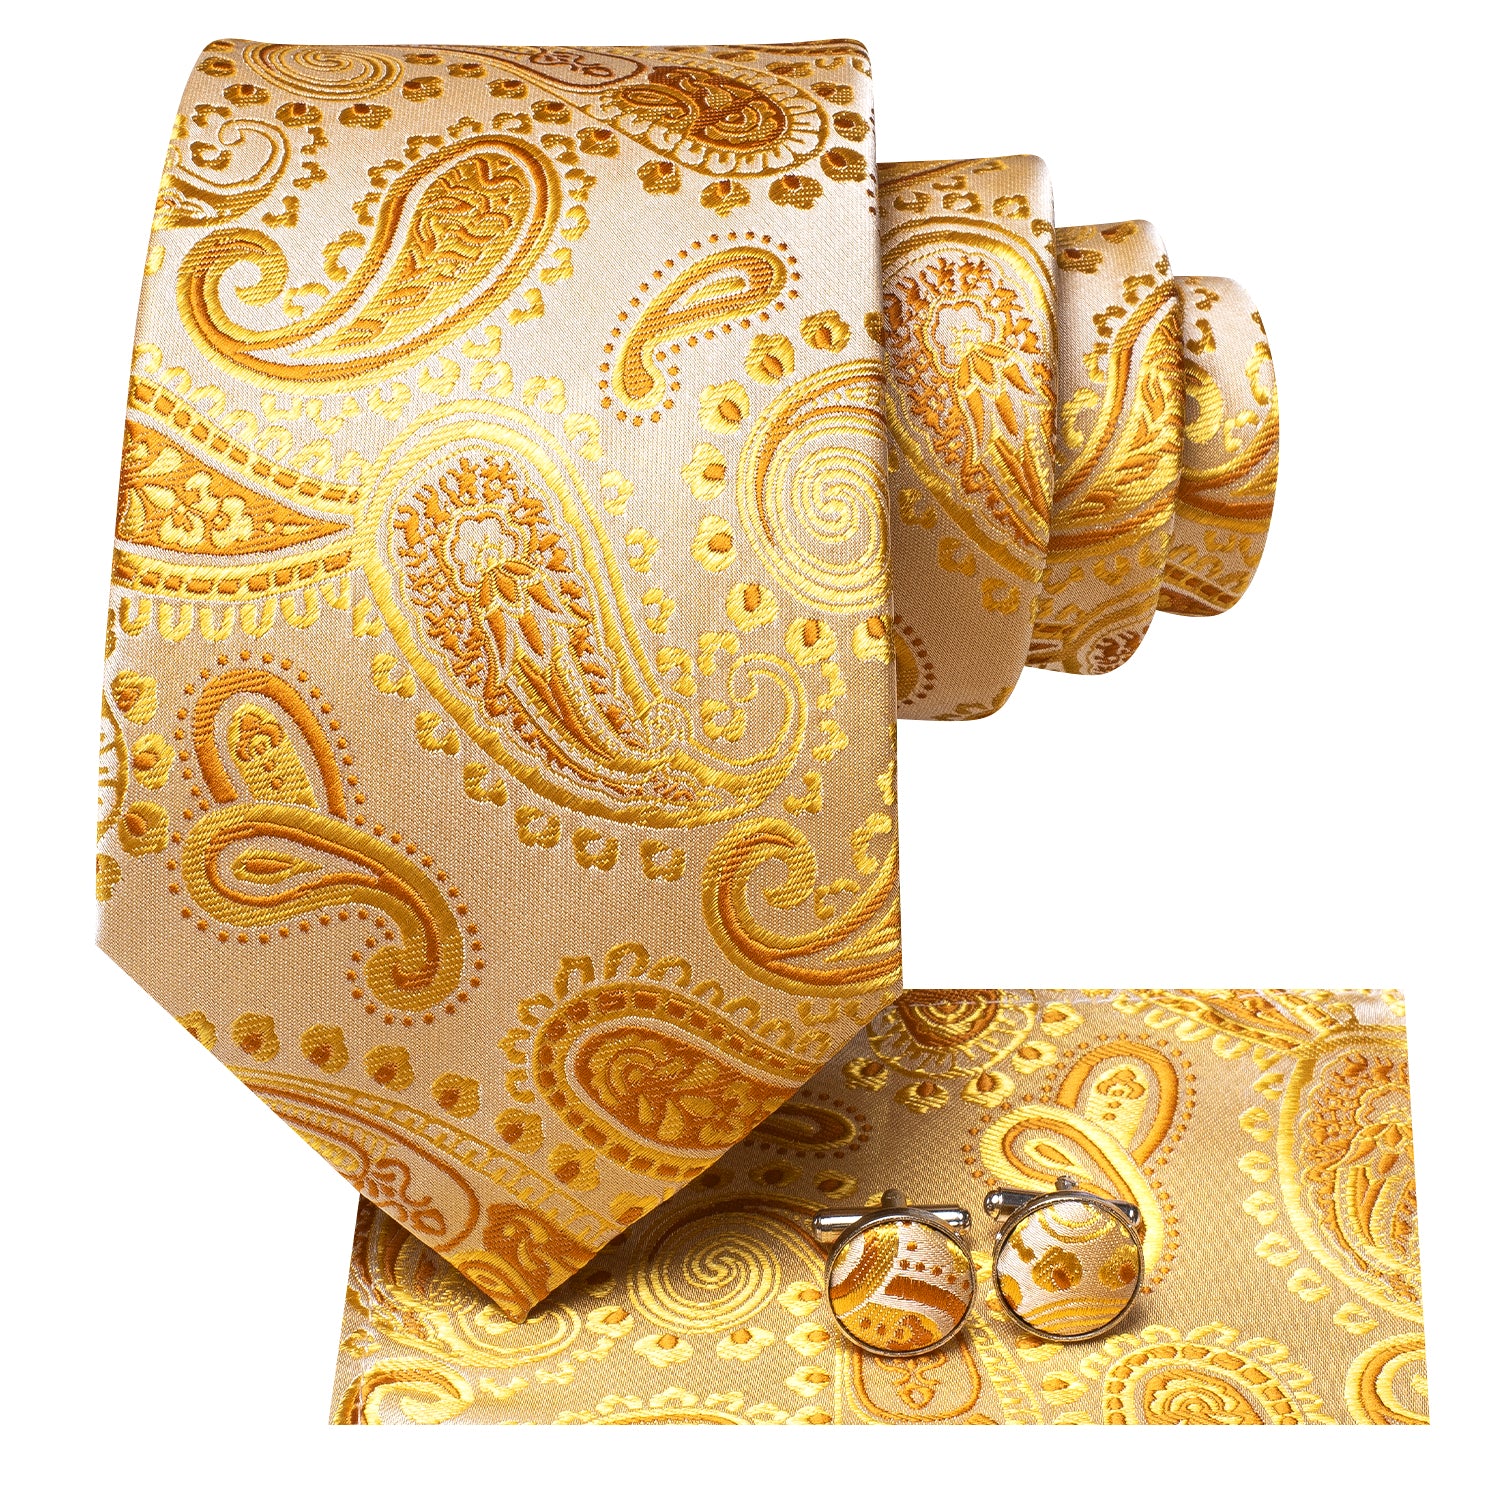 New Yellow Champagne Paisley Tie Pocket Square Cufflinks Set